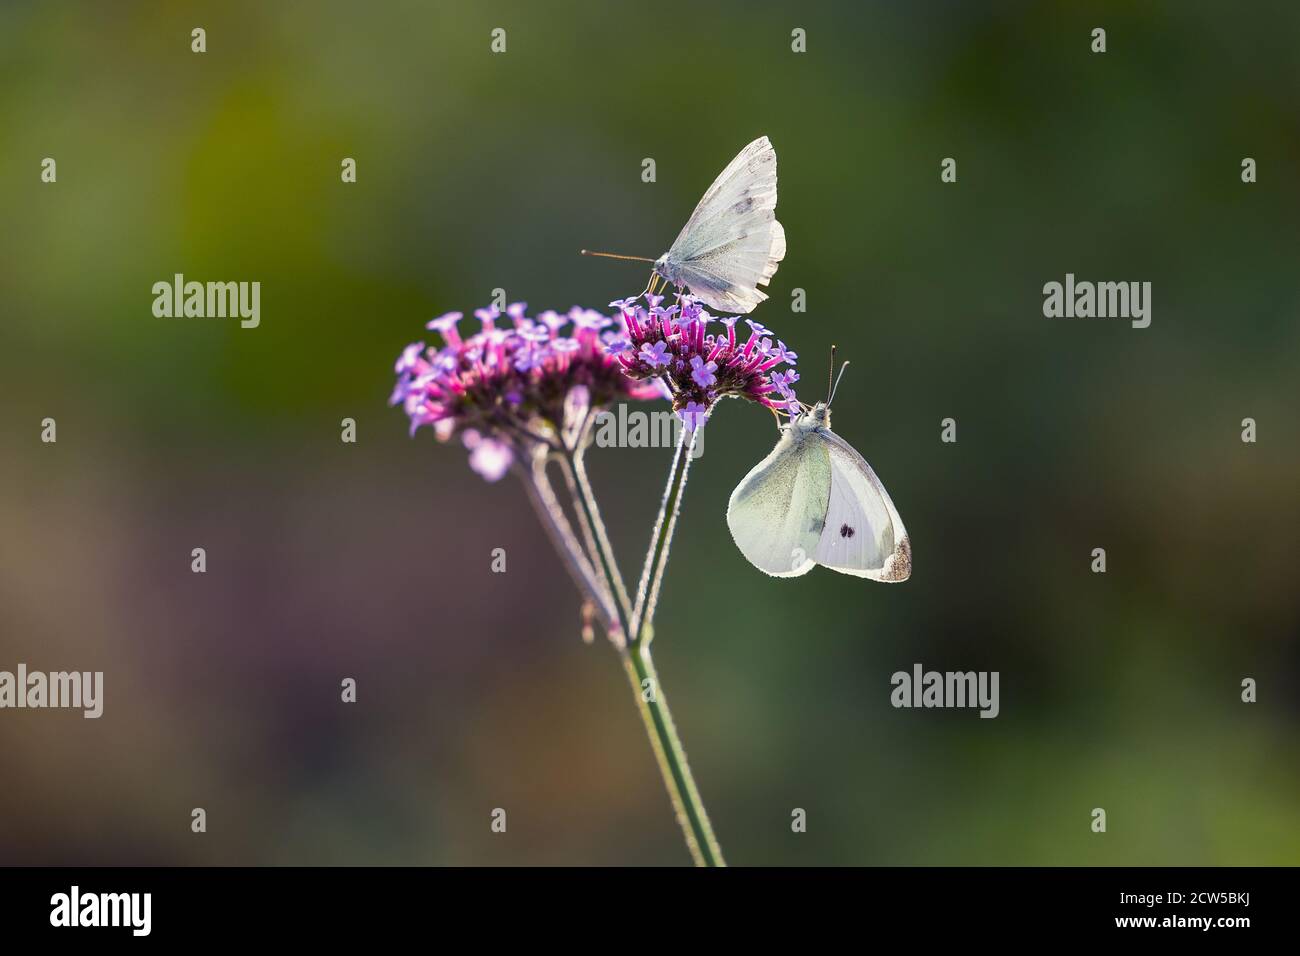 Two Large White butterflies, Pieris brassicae, also called cabbage butterfly, agricultural pests on a Purpletop Vervain flower (Verbena bonariensis) Stock Photo